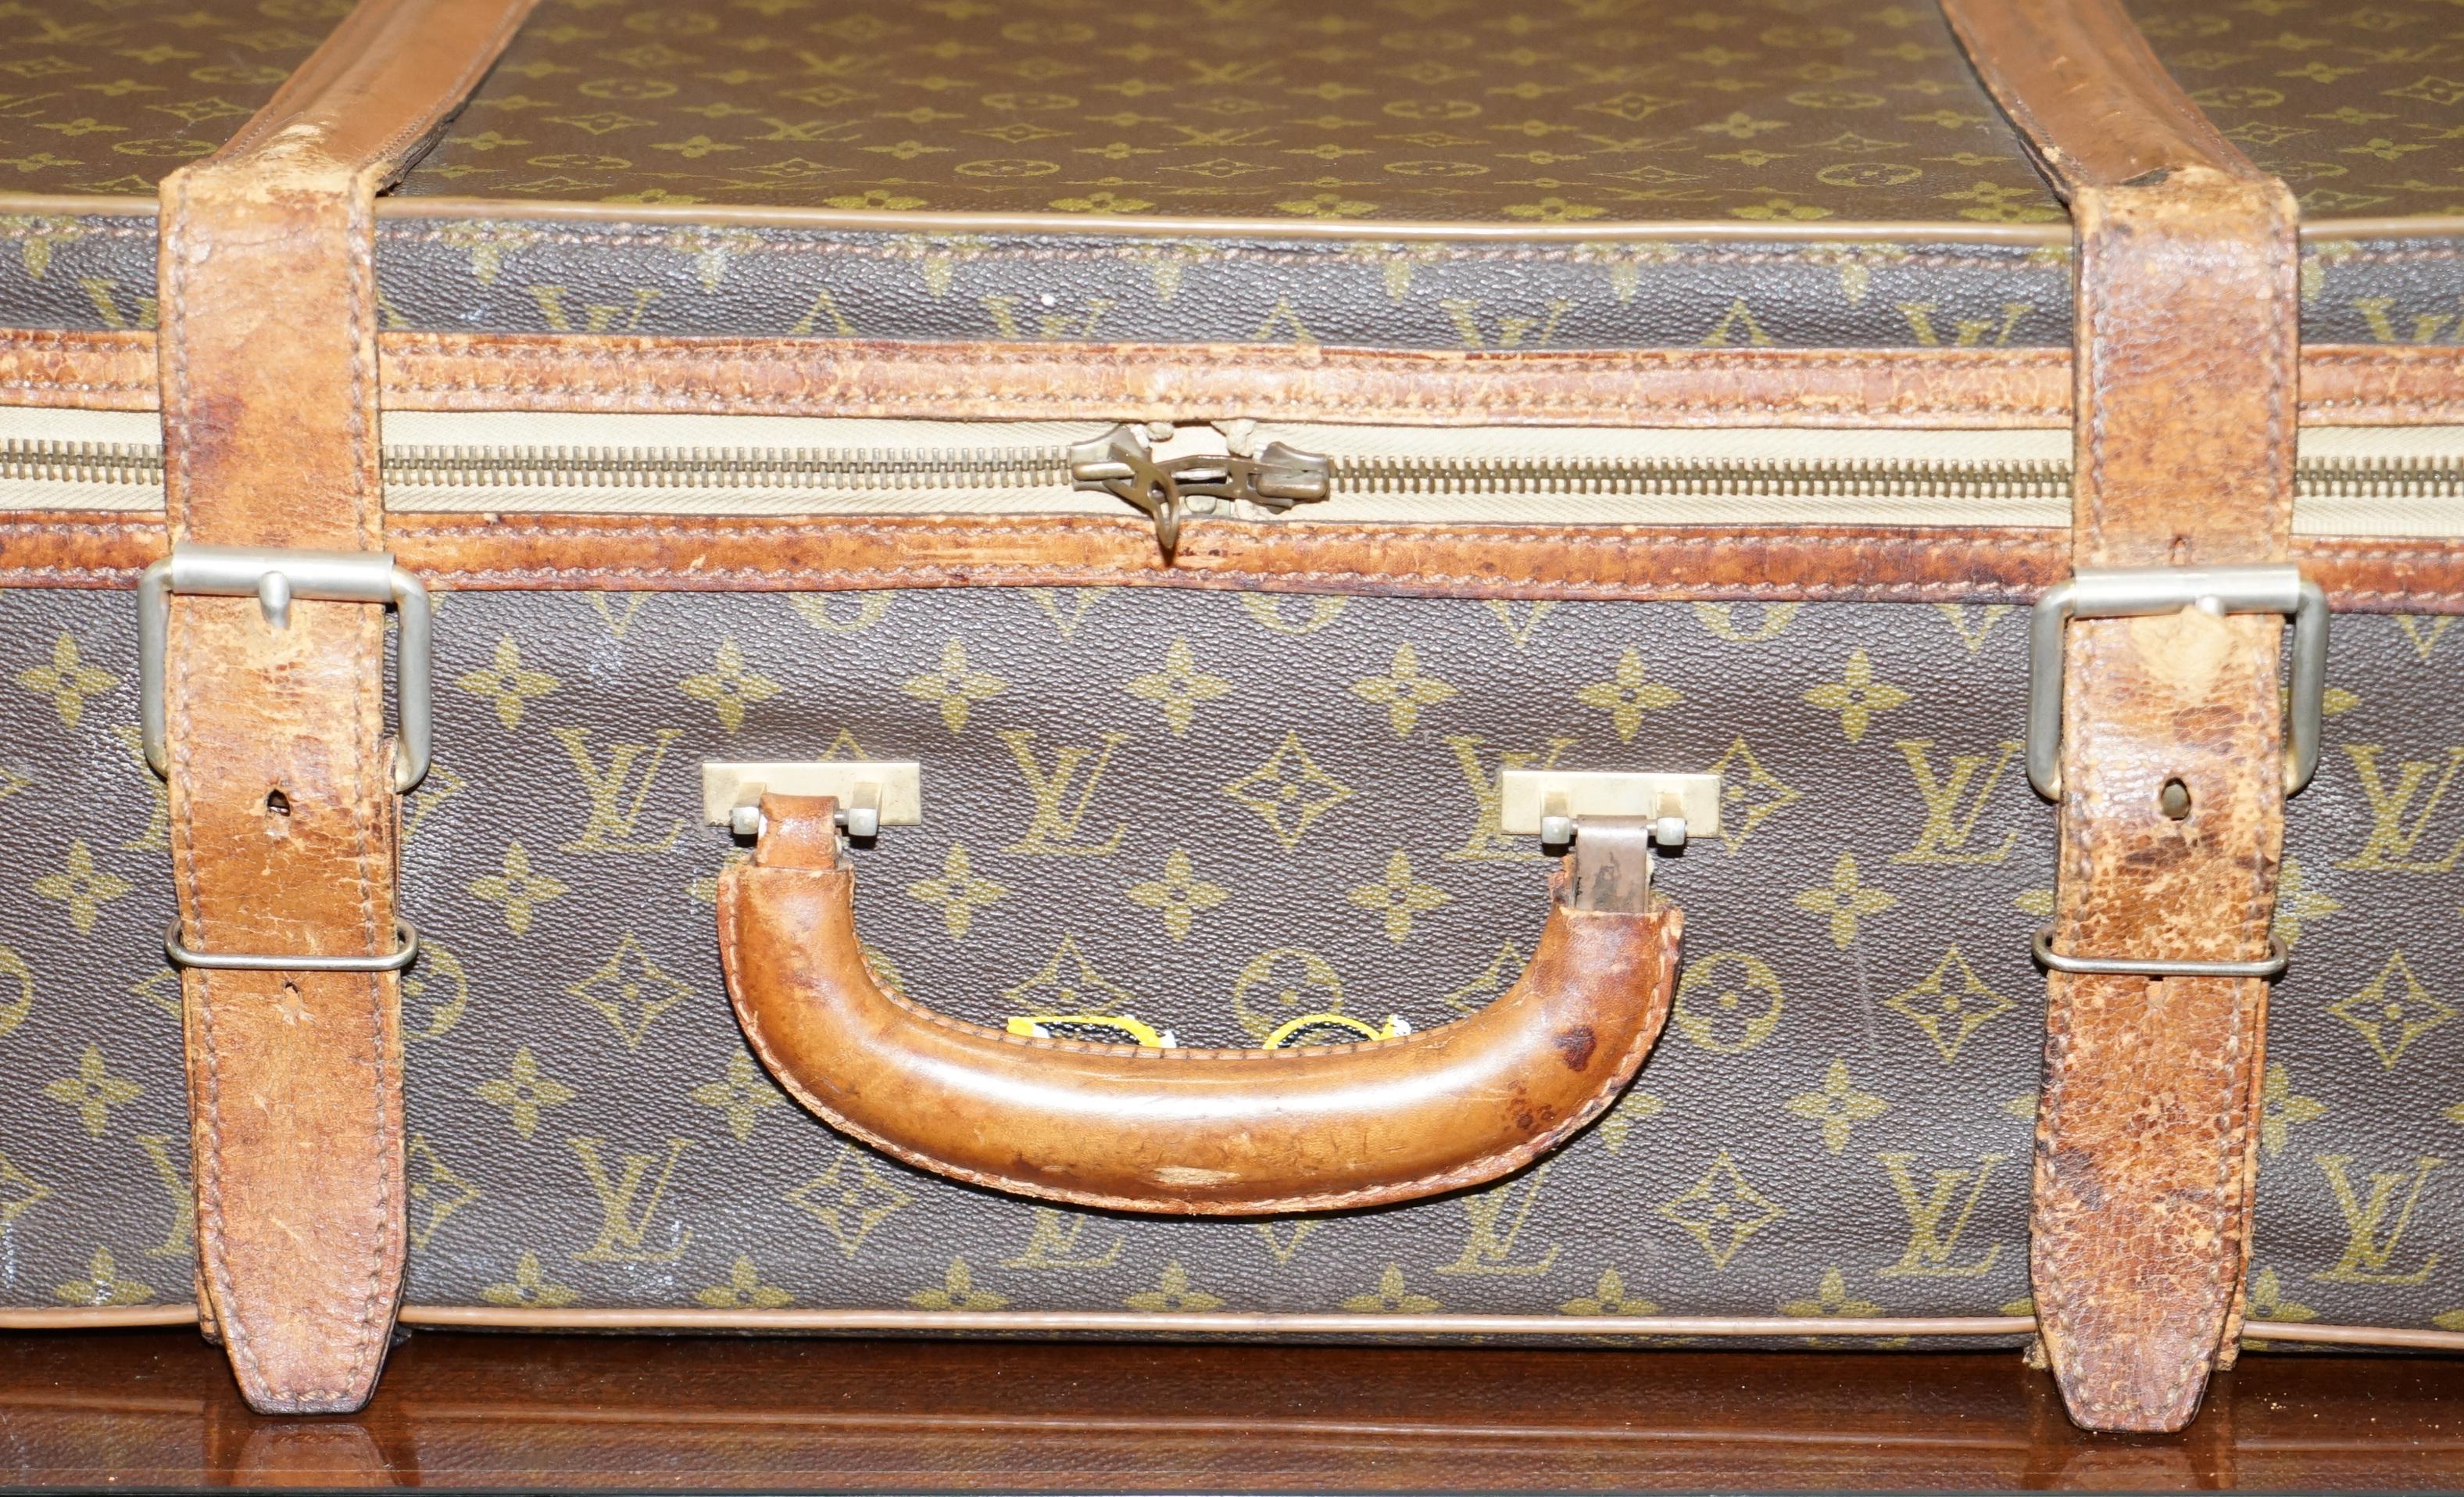 Modern 1 of 2 Vintage Brown Leather Louis Vuitton Strapped Bronze Monogram Suitcases